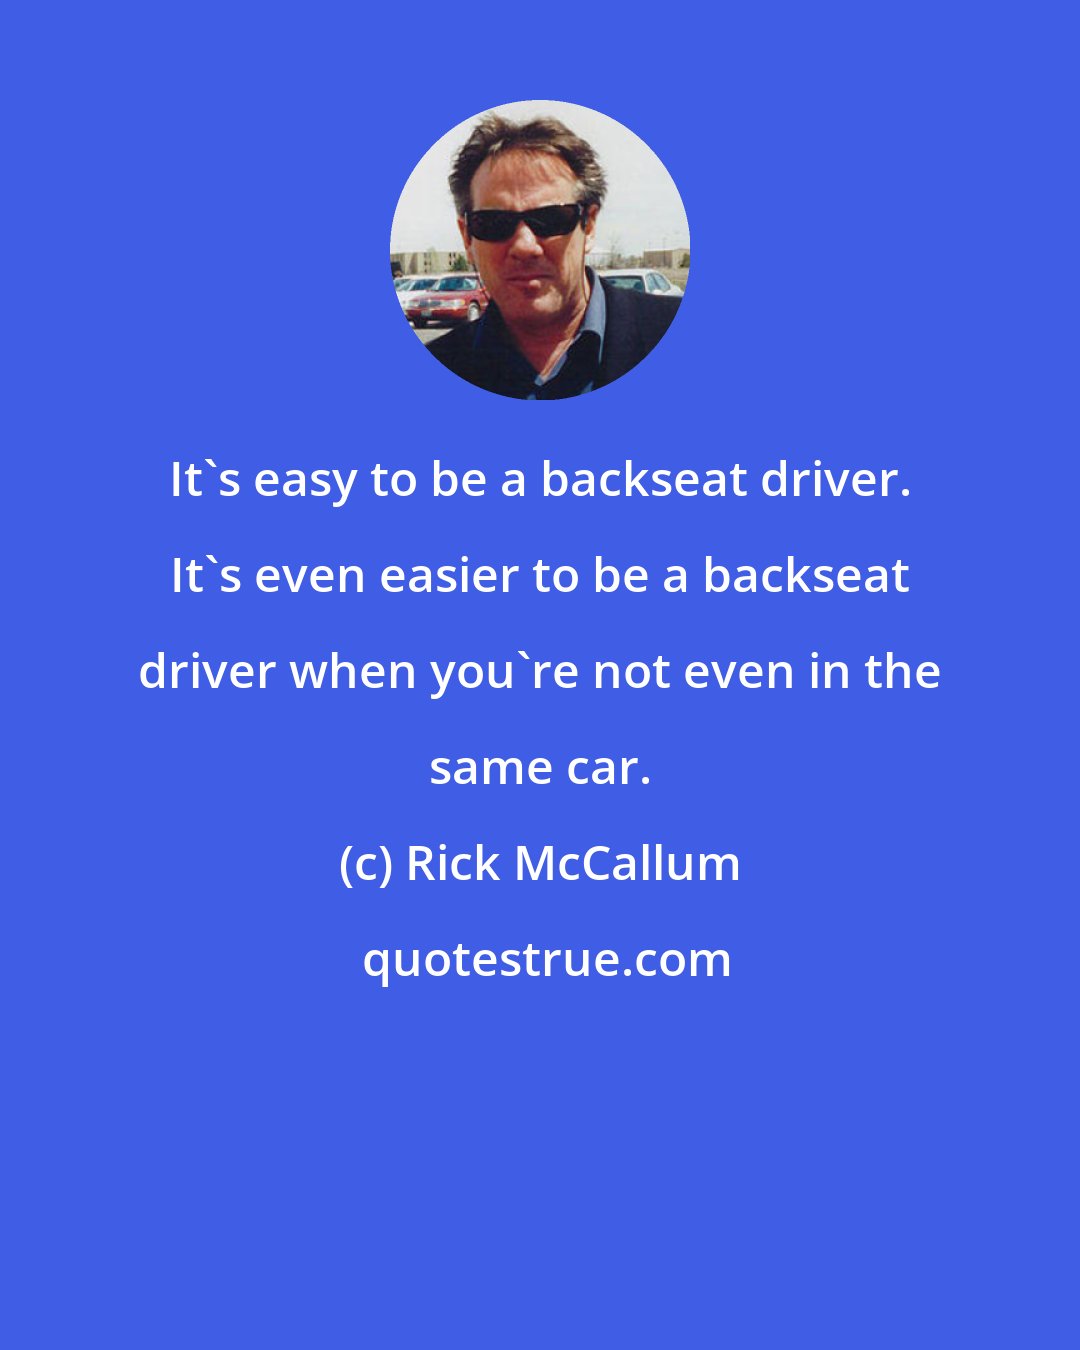 Rick McCallum: It's easy to be a backseat driver. It's even easier to be a backseat driver when you're not even in the same car.